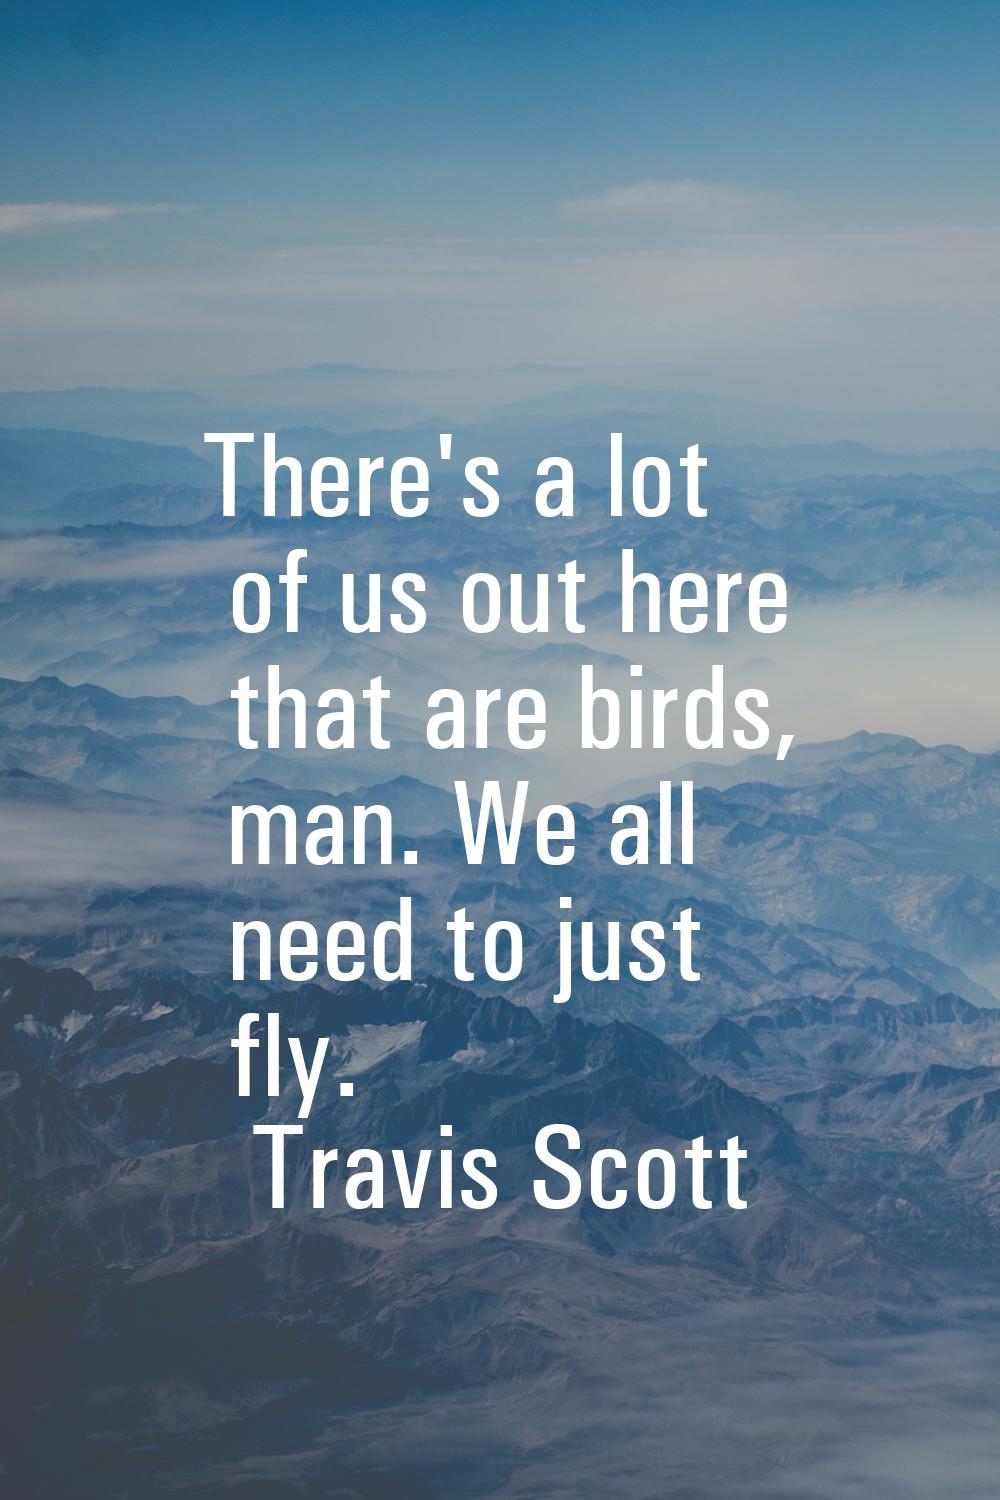 There's a lot of us out here that are birds, man. We all need to just fly.